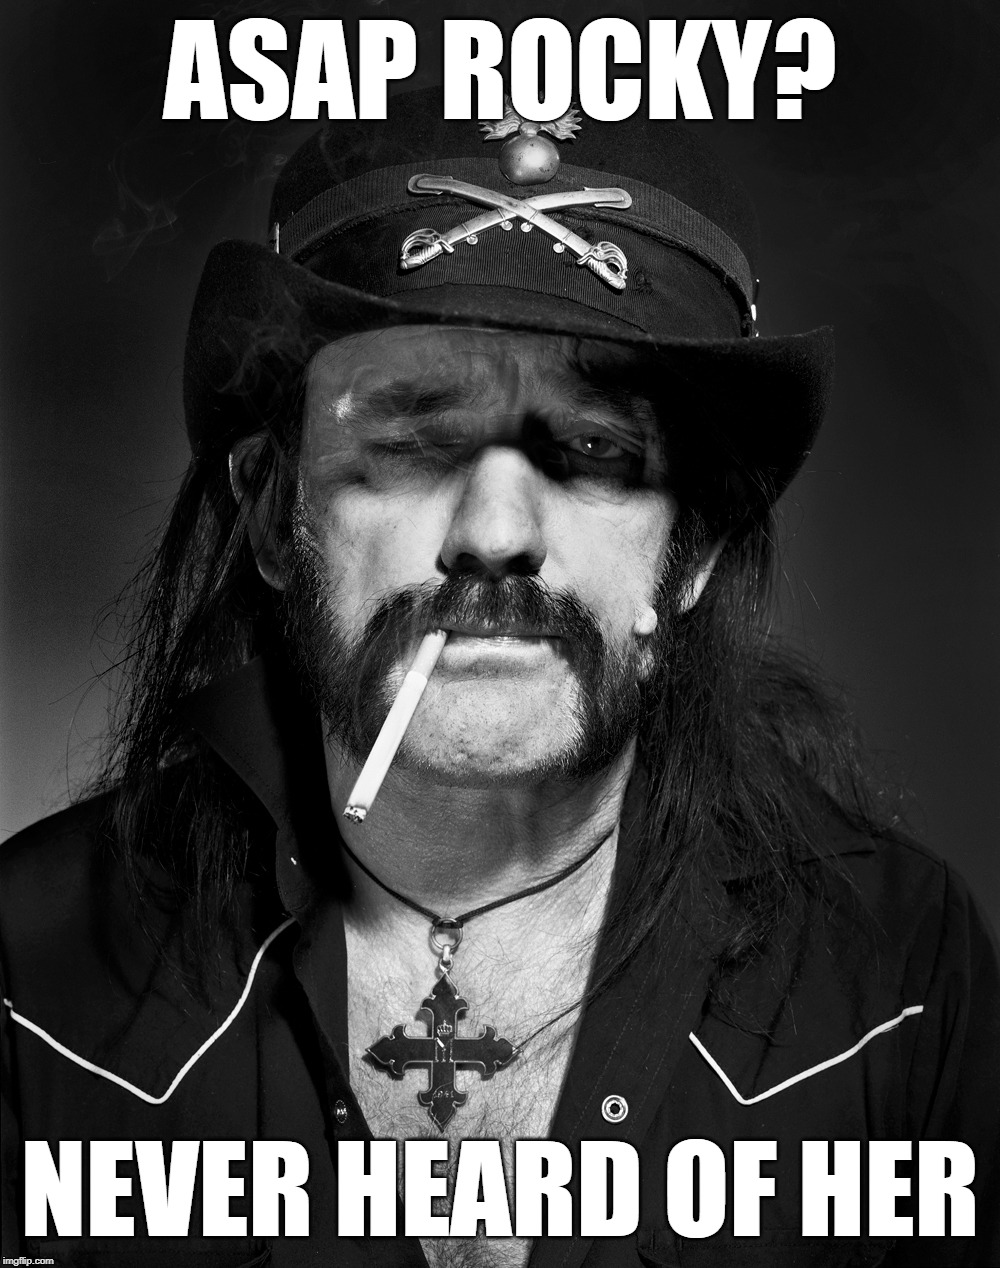 Lemmy about a crappy rapartist | ASAP ROCKY? NEVER HEARD OF HER | image tagged in lemmy,asap rocky,never heard of her | made w/ Imgflip meme maker